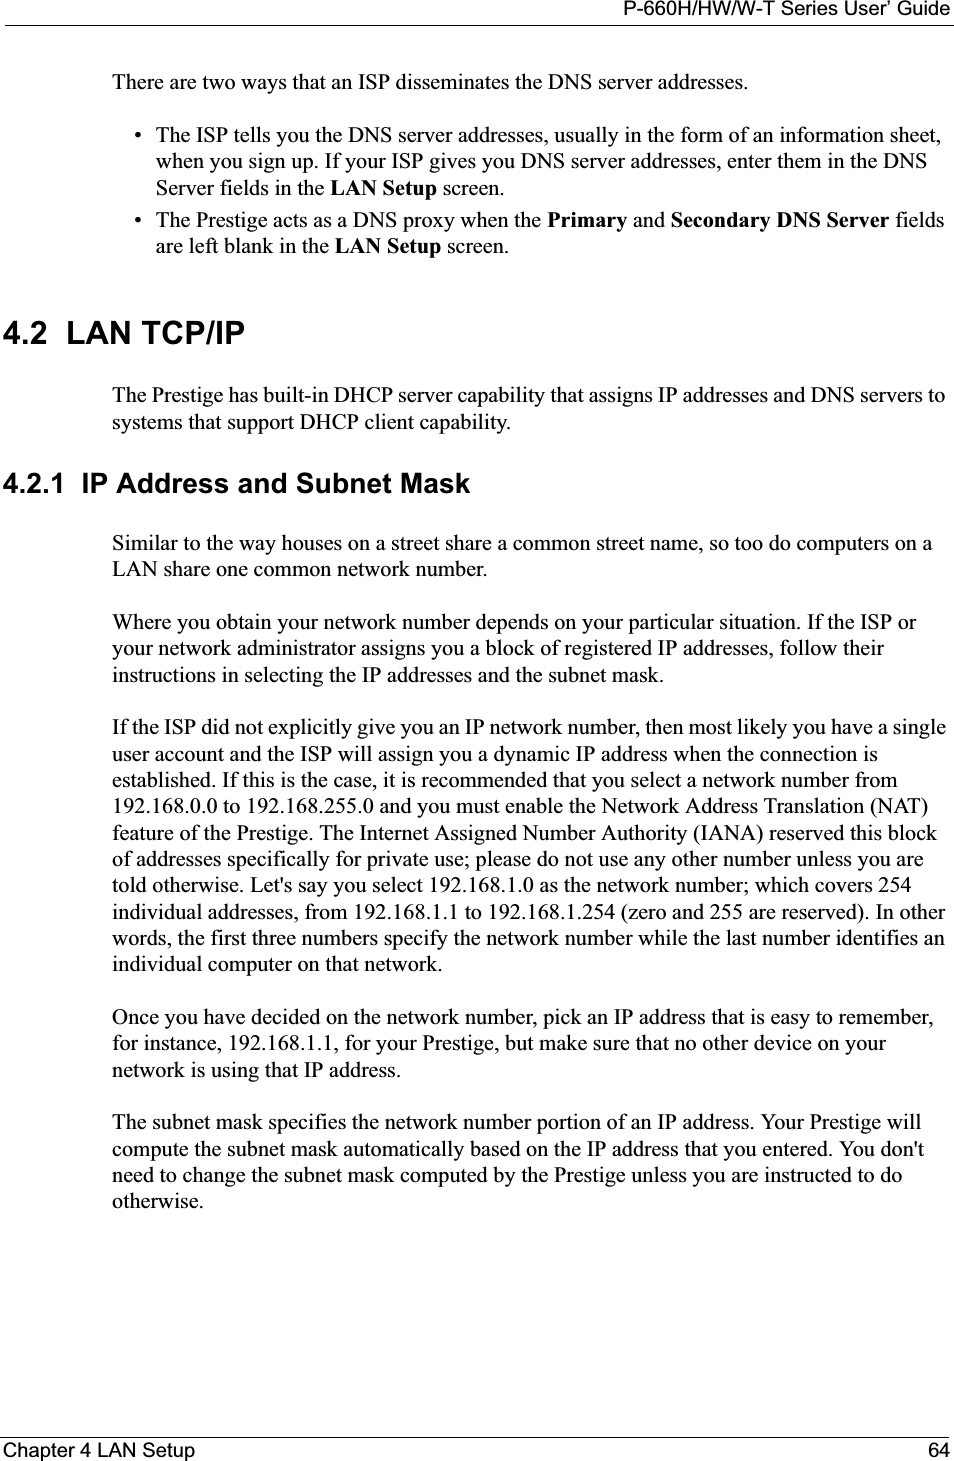 P-660H/HW/W-T Series User’ GuideChapter 4 LAN Setup 64There are two ways that an ISP disseminates the DNS server addresses. • The ISP tells you the DNS server addresses, usually in the form of an information sheet, when you sign up. If your ISP gives you DNS server addresses, enter them in the DNS Server fields in the LAN Setup screen.• The Prestige acts as a DNS proxy when the Primary and Secondary DNS Server fieldsare left blank in the LAN Setup screen.4.2  LAN TCP/IP The Prestige has built-in DHCP server capability that assigns IP addresses and DNS servers to systems that support DHCP client capability.4.2.1  IP Address and Subnet MaskSimilar to the way houses on a street share a common street name, so too do computers on a LAN share one common network number.Where you obtain your network number depends on your particular situation. If the ISP or your network administrator assigns you a block of registered IP addresses, follow their instructions in selecting the IP addresses and the subnet mask.If the ISP did not explicitly give you an IP network number, then most likely you have a single user account and the ISP will assign you a dynamic IP address when the connection is established. If this is the case, it is recommended that you select a network number from 192.168.0.0 to 192.168.255.0 and you must enable the Network Address Translation (NAT) feature of the Prestige. The Internet Assigned Number Authority (IANA) reserved this block of addresses specifically for private use; please do not use any other number unless you are told otherwise. Let&apos;s say you select 192.168.1.0 as the network number; which covers 254 individual addresses, from 192.168.1.1 to 192.168.1.254 (zero and 255 are reserved). In other words, the first three numbers specify the network number while the last number identifies an individual computer on that network.Once you have decided on the network number, pick an IP address that is easy to remember, for instance, 192.168.1.1, for your Prestige, but make sure that no other device on your network is using that IP address.The subnet mask specifies the network number portion of an IP address. Your Prestige will compute the subnet mask automatically based on the IP address that you entered. You don&apos;t need to change the subnet mask computed by the Prestige unless you are instructed to do otherwise.